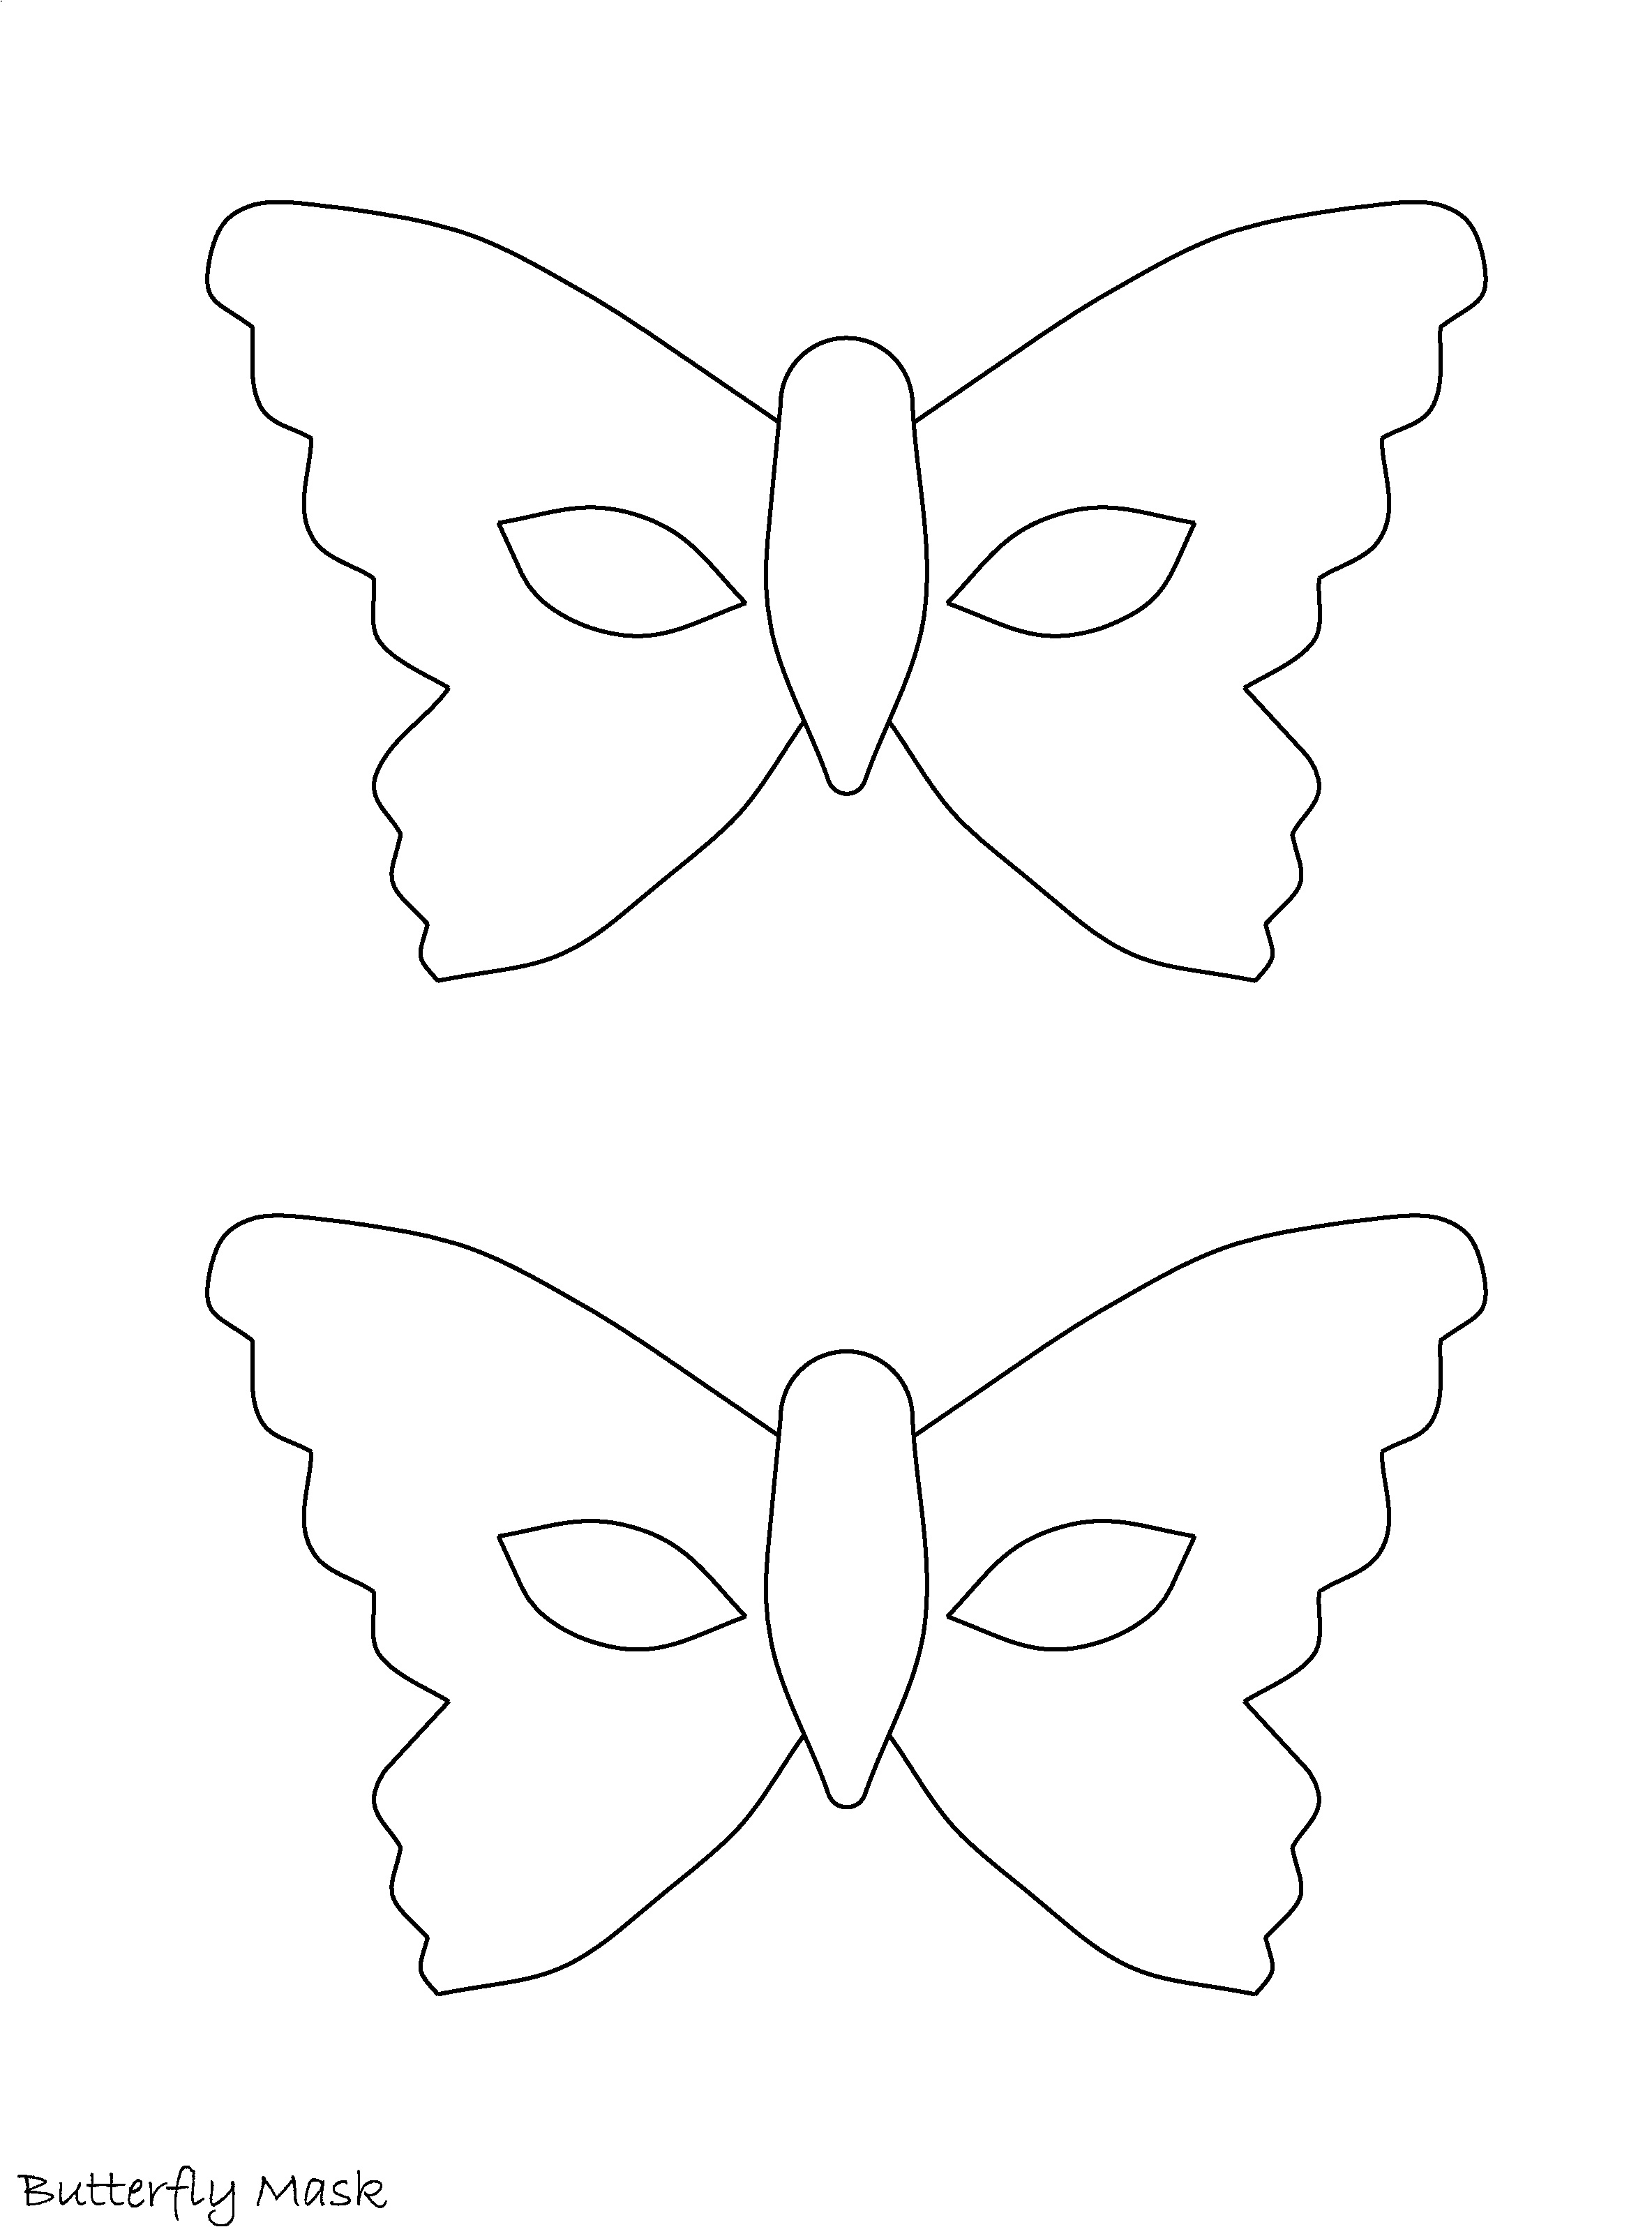 7-best-images-of-face-mask-patterns-printable-butterfly-mask-templates-printable-printable